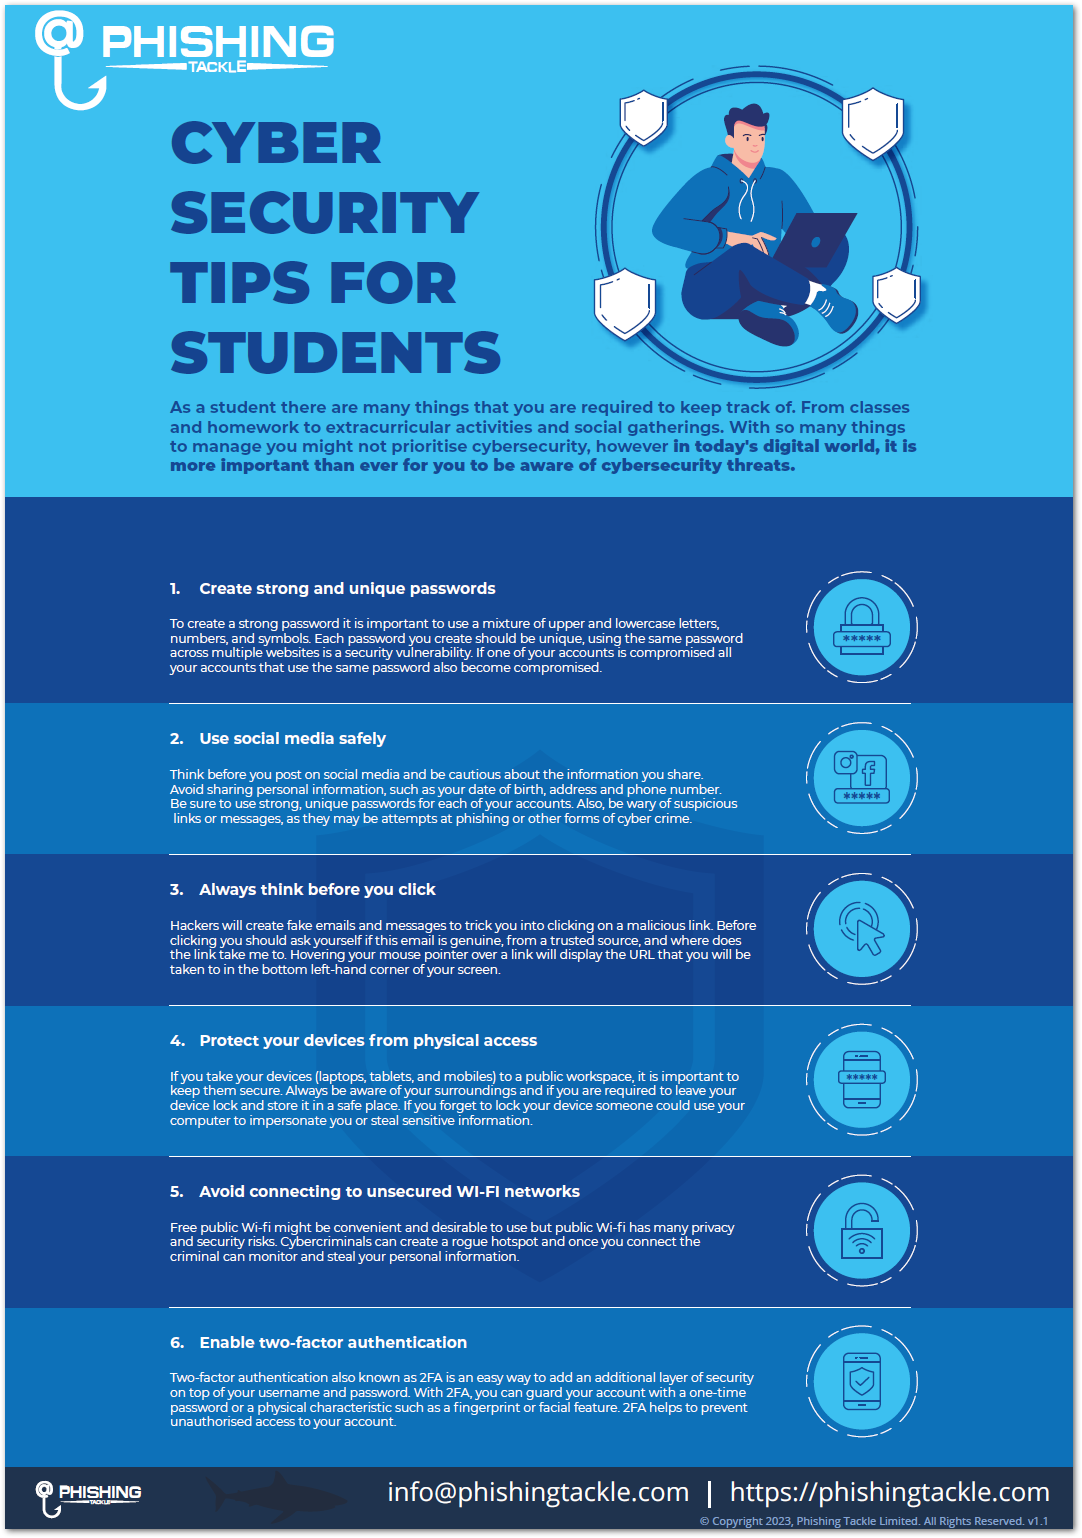 Phishing Tackle Cybersecurity for Students Infographic